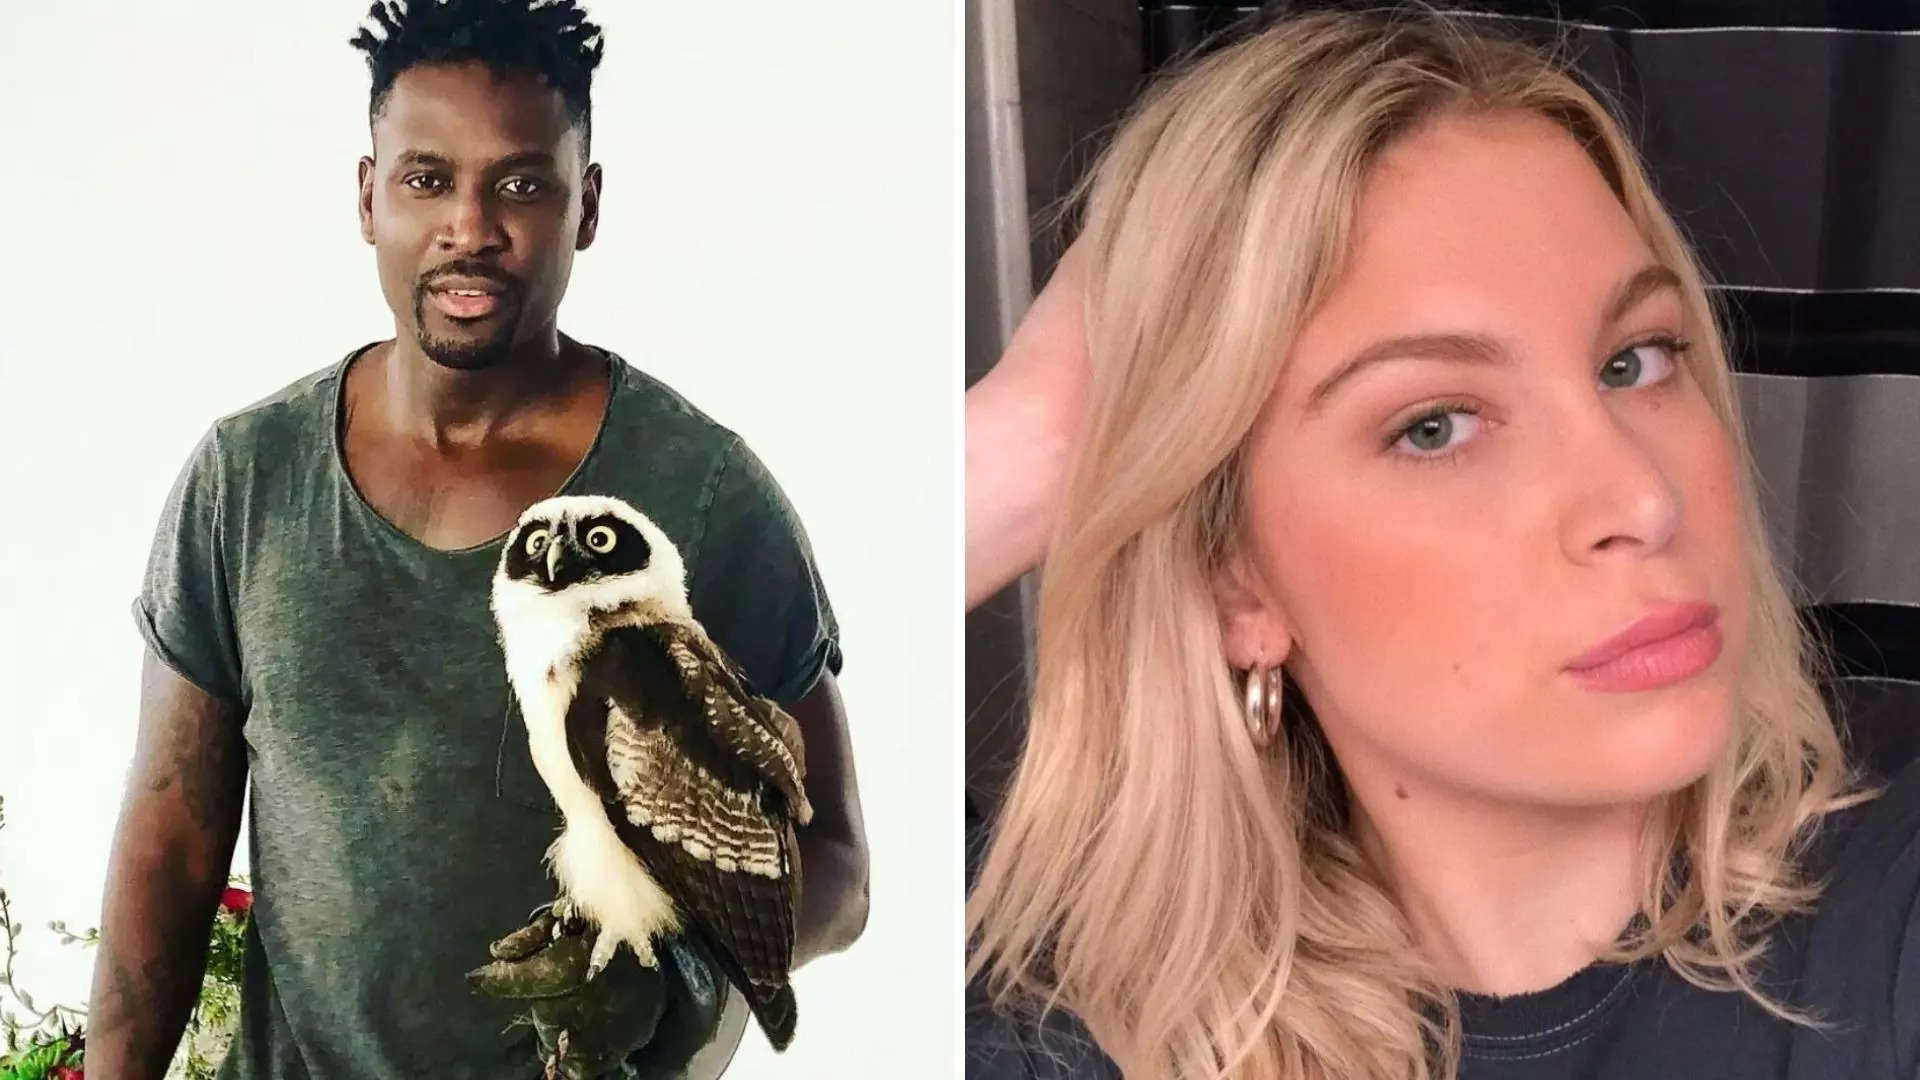 William Lords (left) was called out by Megan Mesveskas (right) in a TikTok video | Image: Instagram